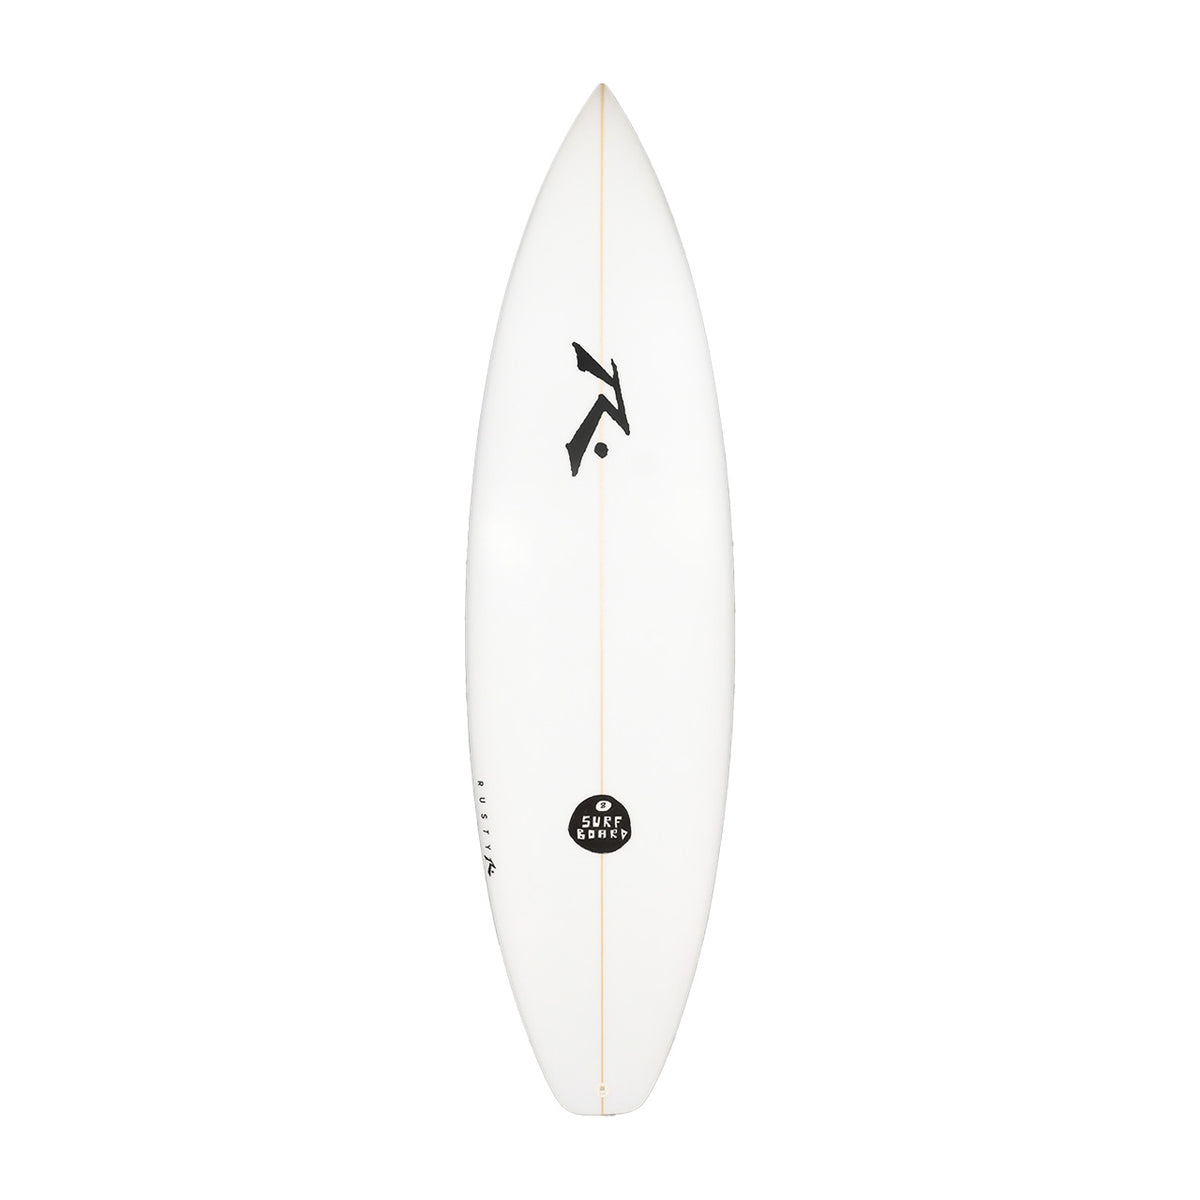 Model 8 High Performance Shortboard - Deck View - Rusty Surfboards